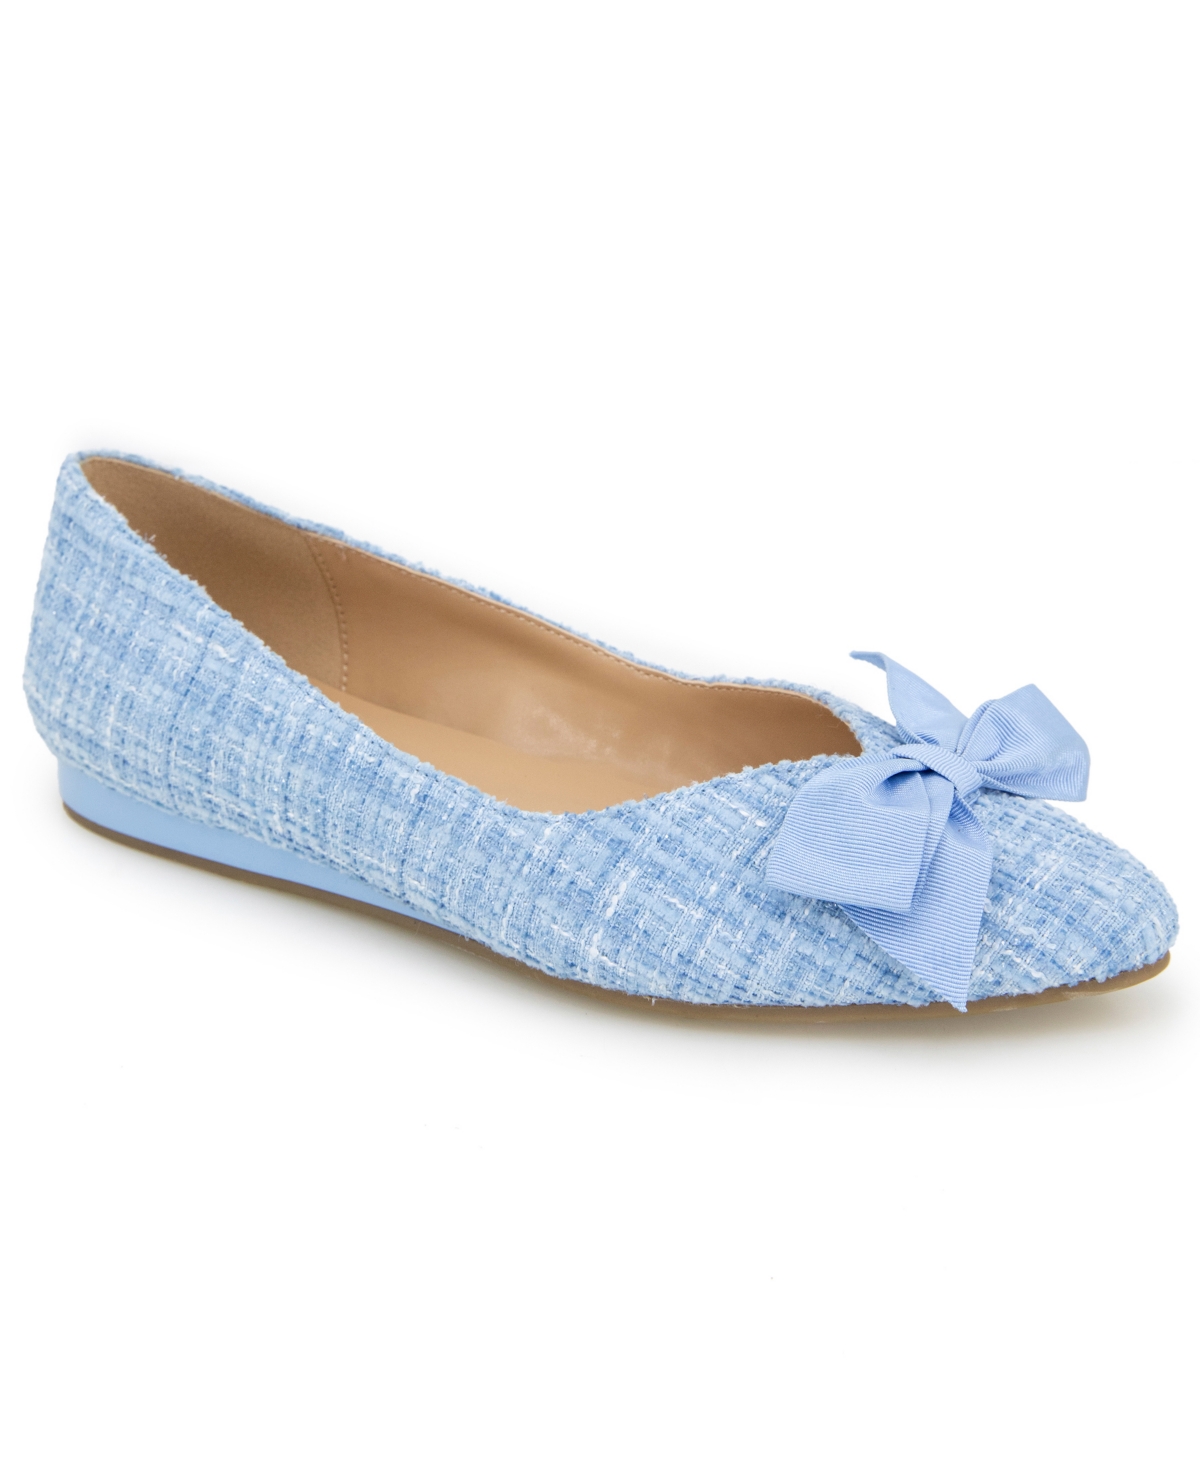 Women's Lily Bow Pumps - Pastel pink Fabric